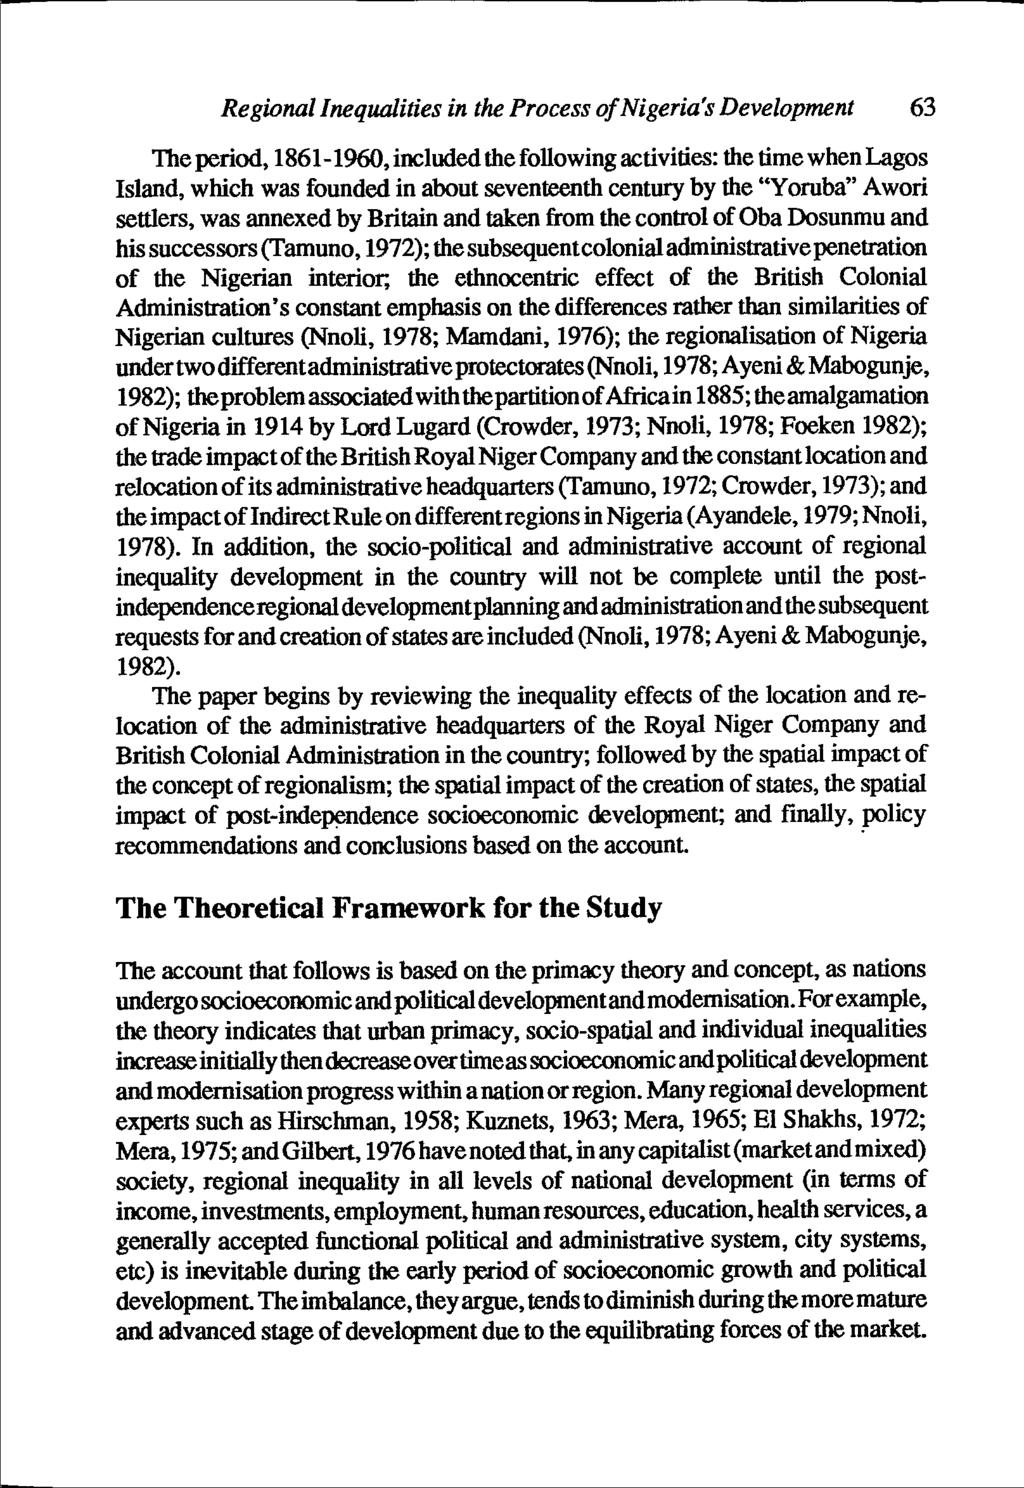 Regional Inequalities in the Process of Nigeria's Development 63 The period, 1861-1960, included the following activities: the time when Lagos Island, which was founded in about seventeenth century